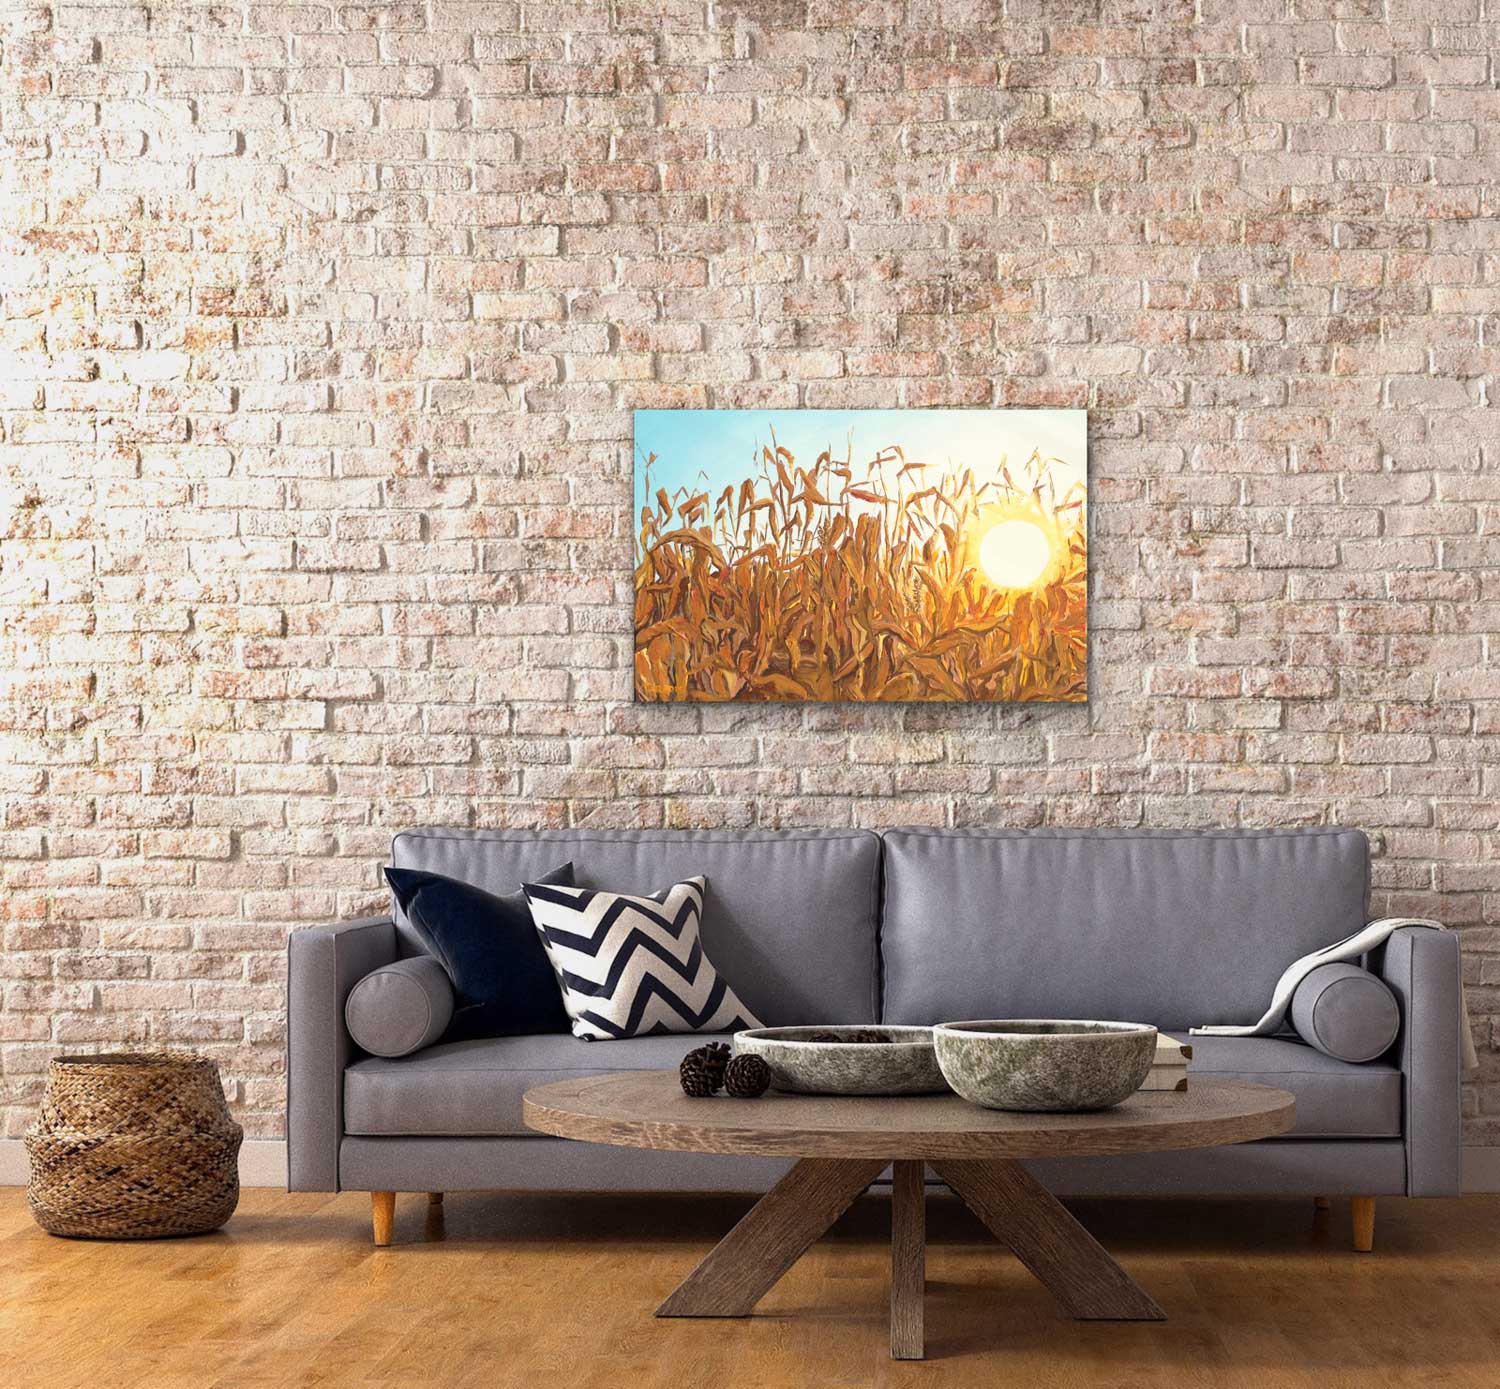 Dry autumn corn stalk field illuminated by the sunlight. high quality giclee print on canvas by a professional canadian urban landscape artist. visual art ready to hang on your wall.